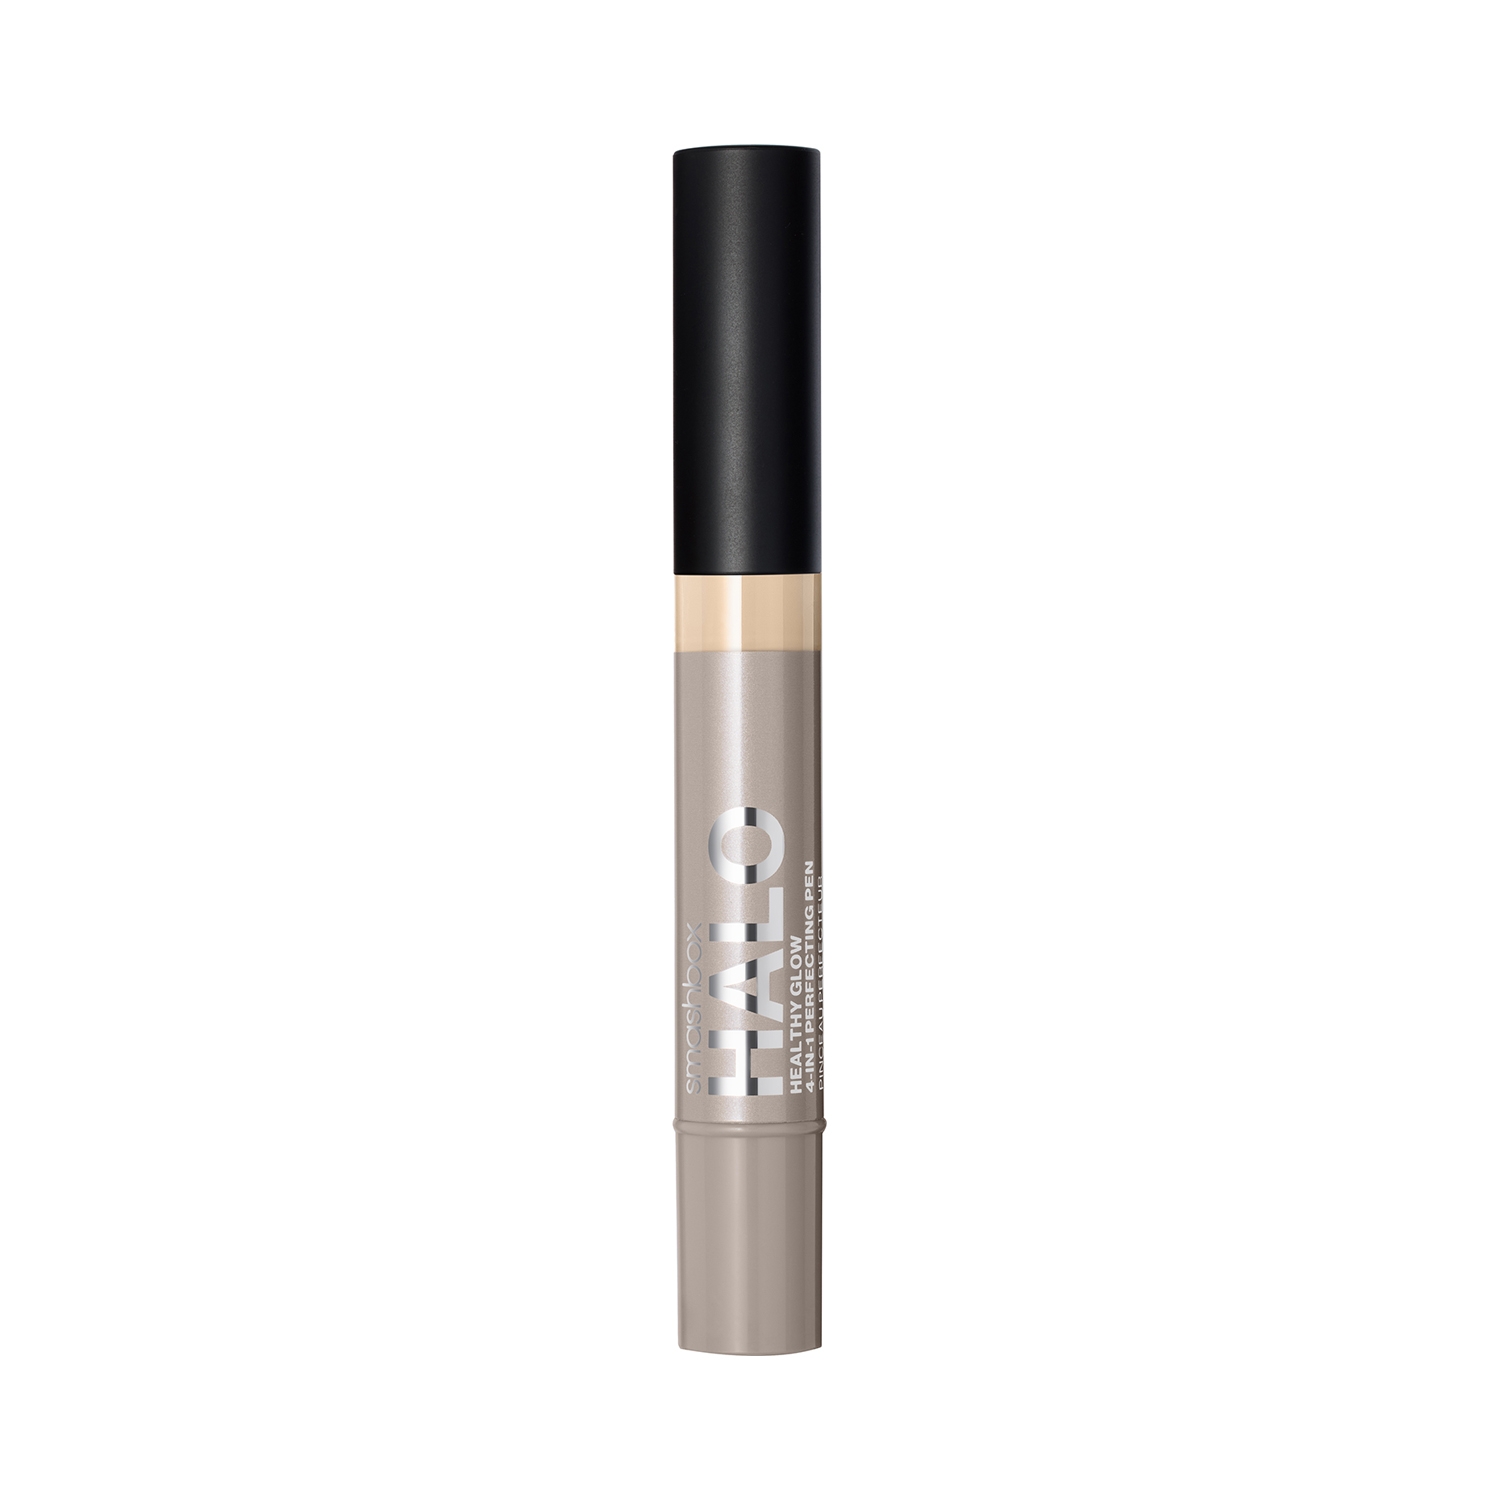 Smashbox | Smashbox Halo Healthy Glow 4-In-1 Perfecting Concealer Pen - F10N (3.5ml)